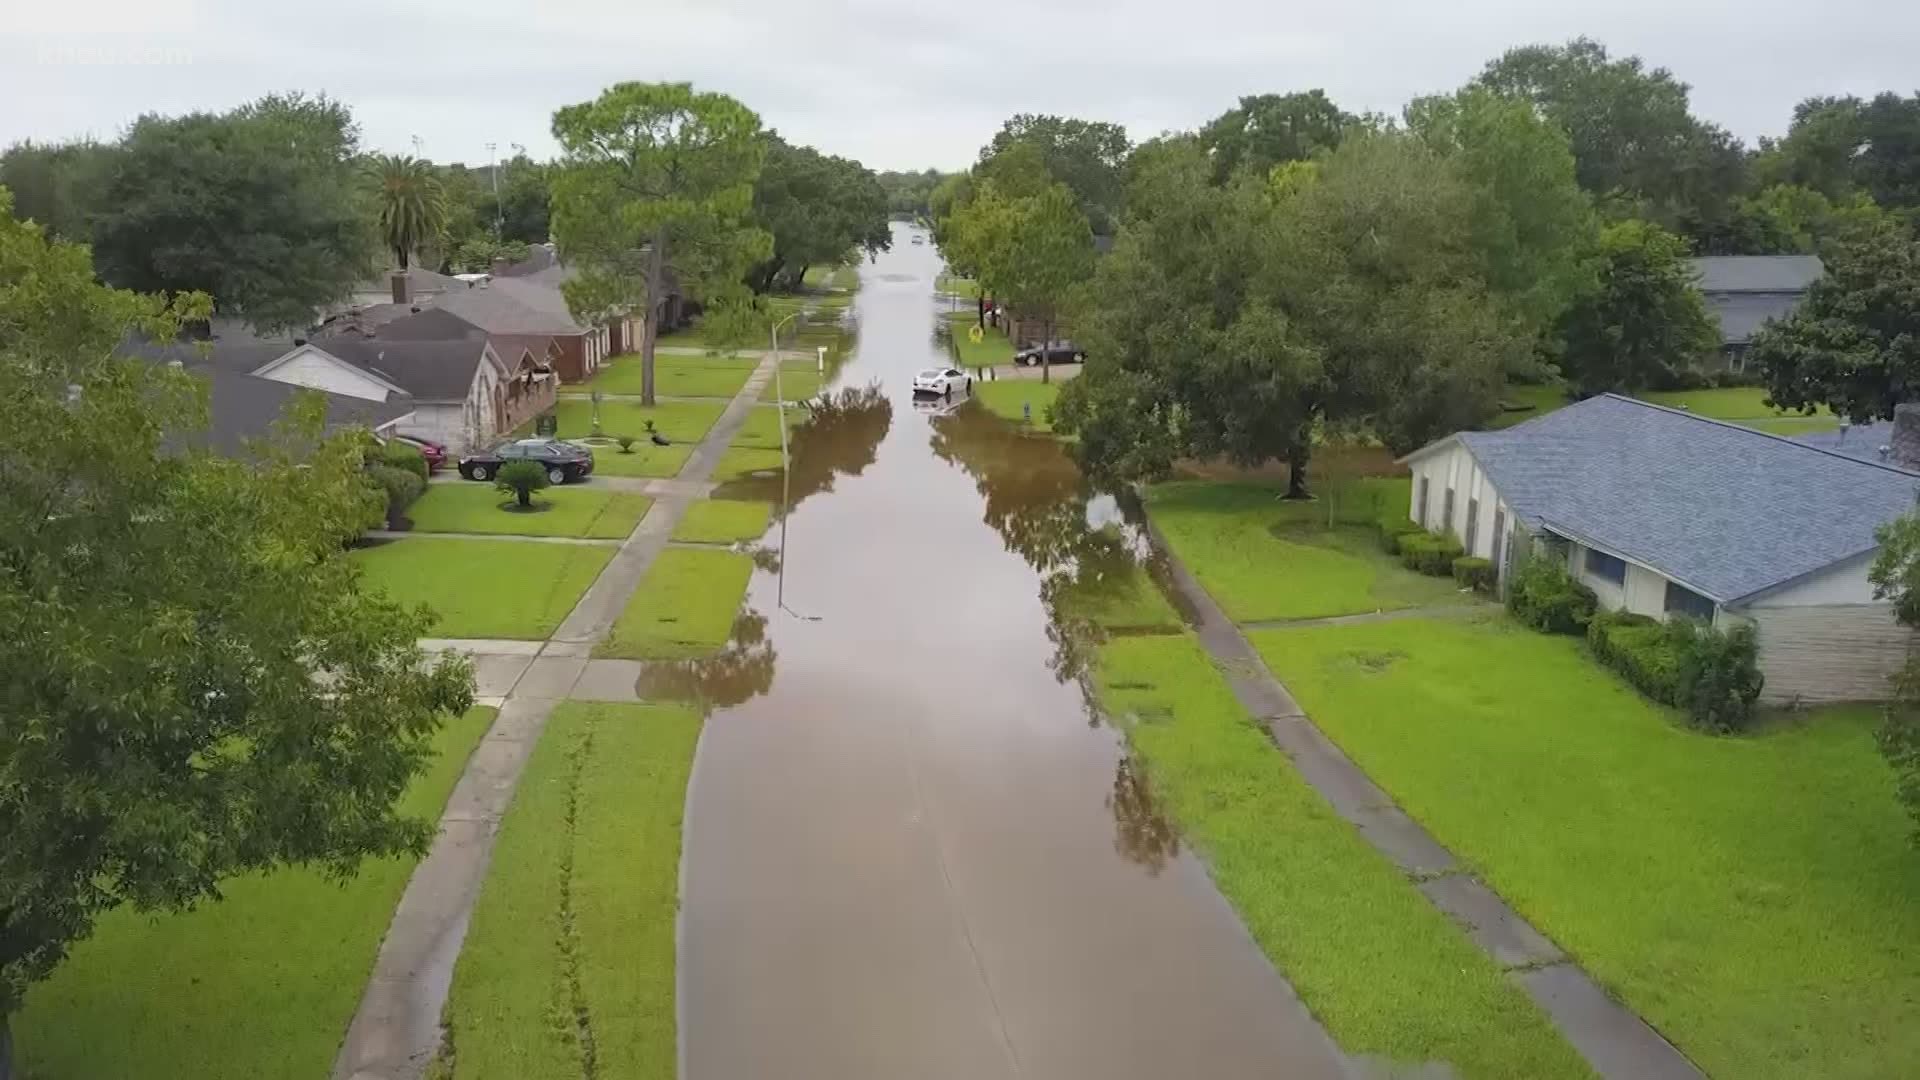 Tropical Storm Beta hit the Houston area and left behind plenty of damage.